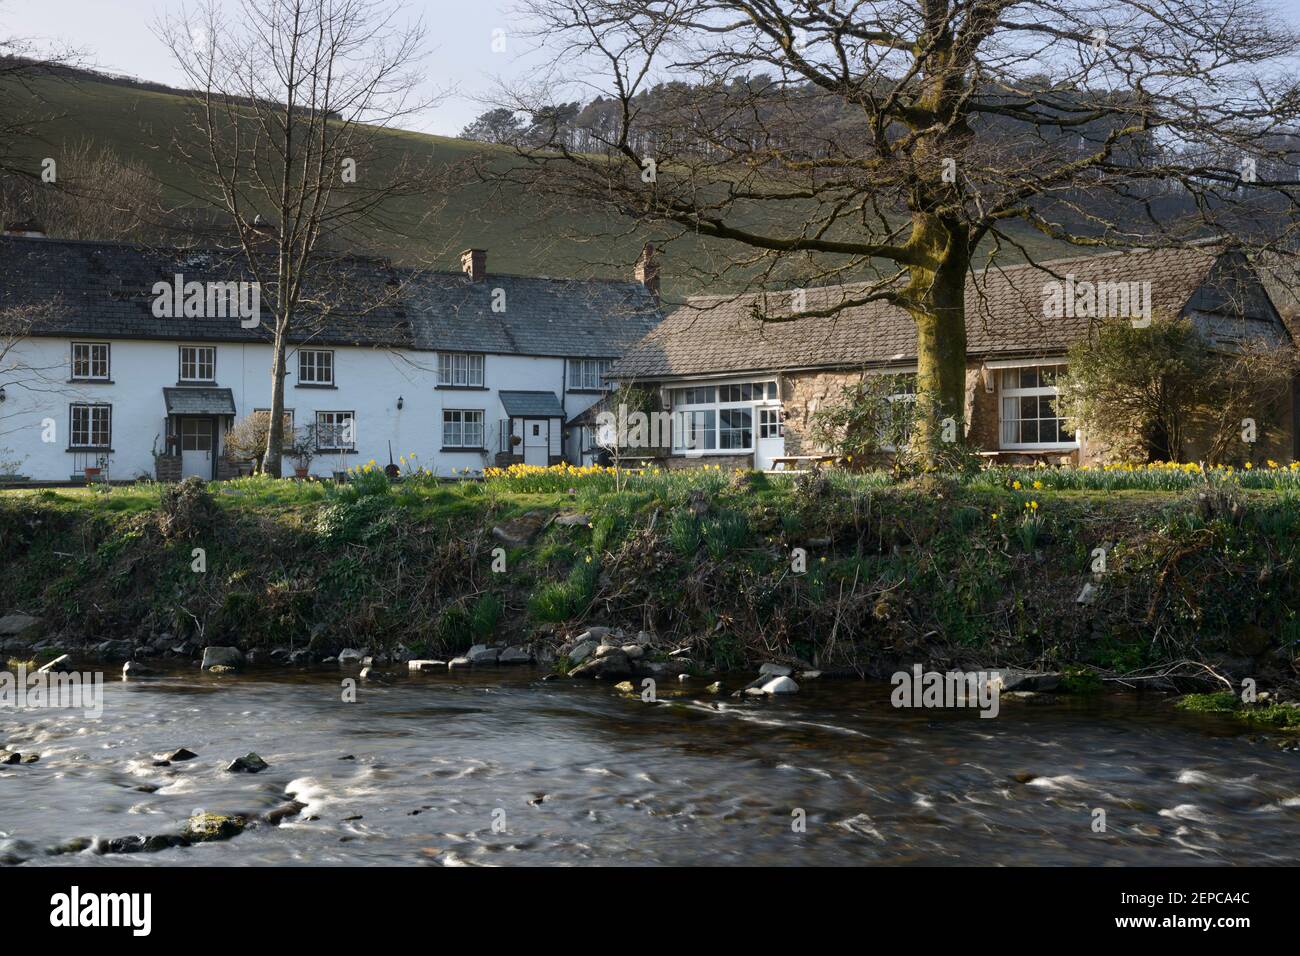 Cottages in the village of Malmsmead, Exmoor, Somerset. Stock Photo